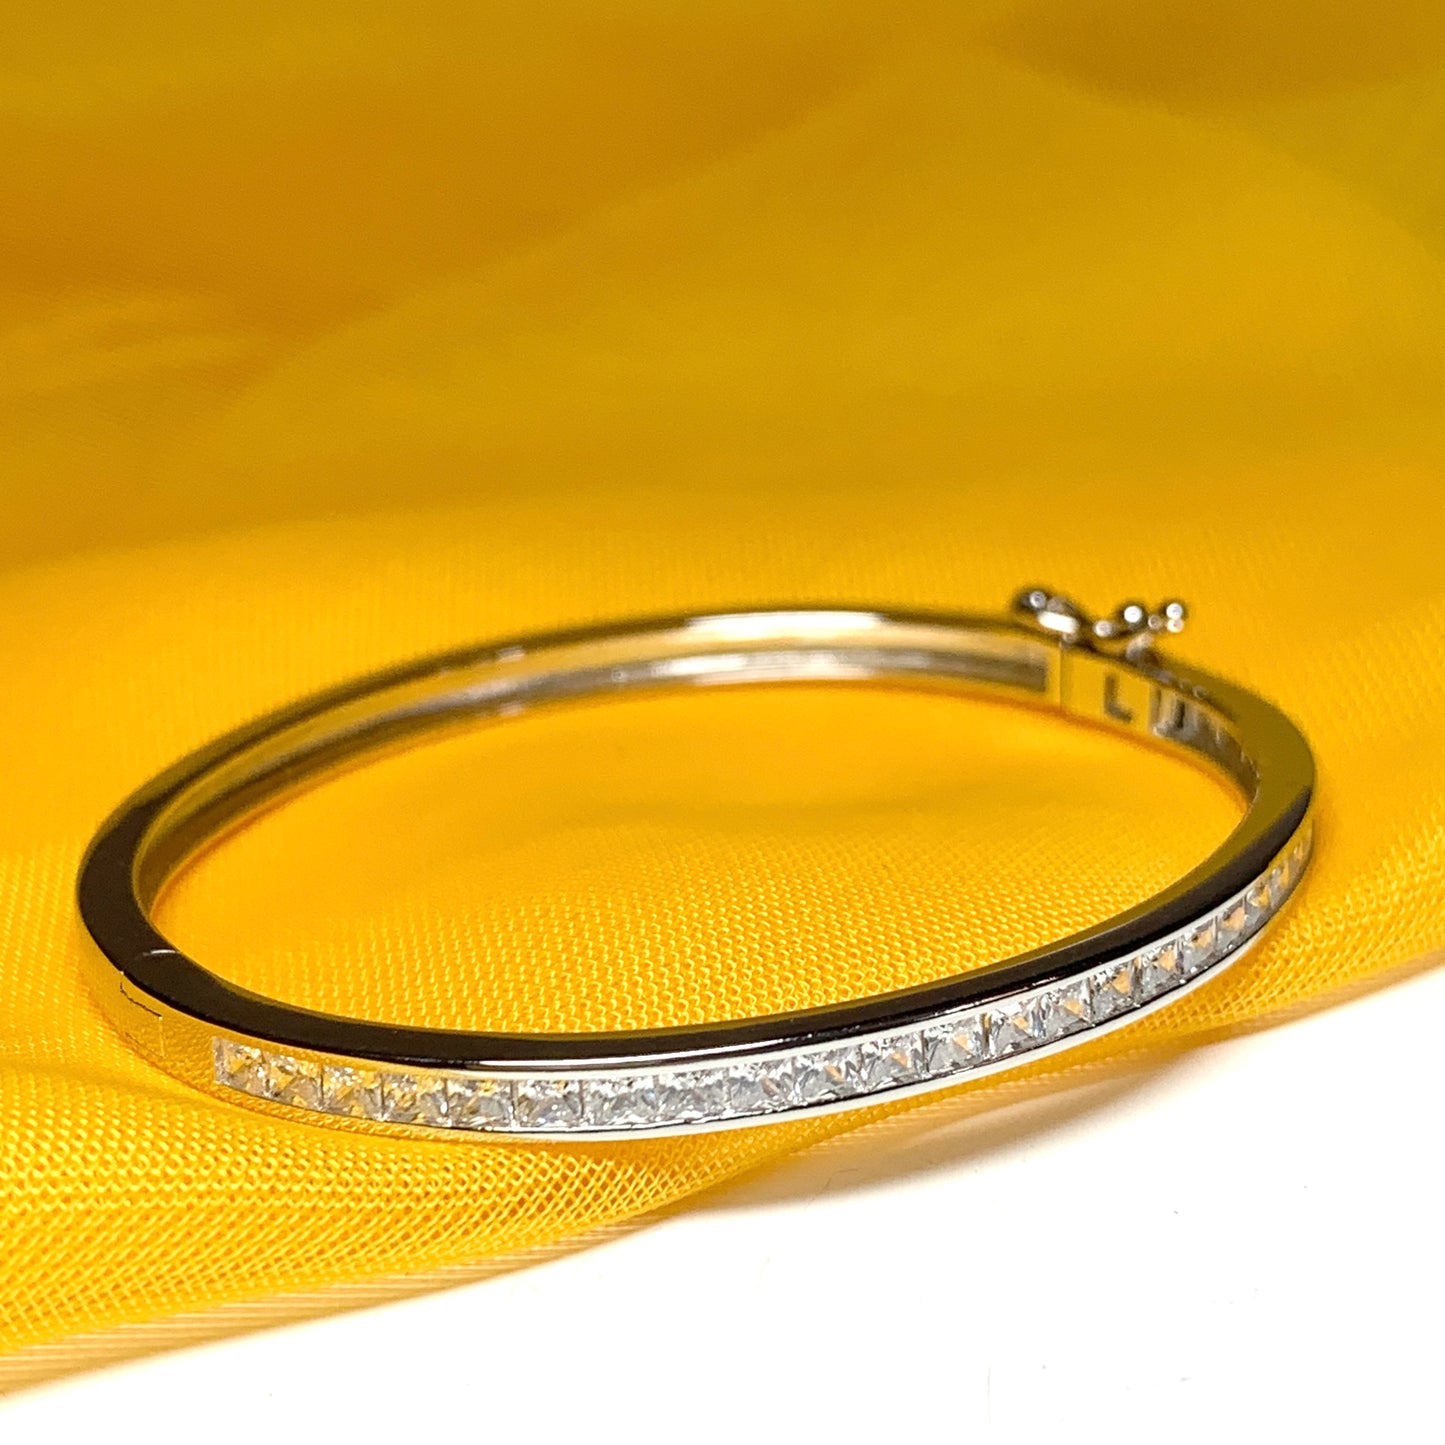 Child's Oval Bangle with Princess Cut Cubic Zirconia Sterling Silver Channel Set